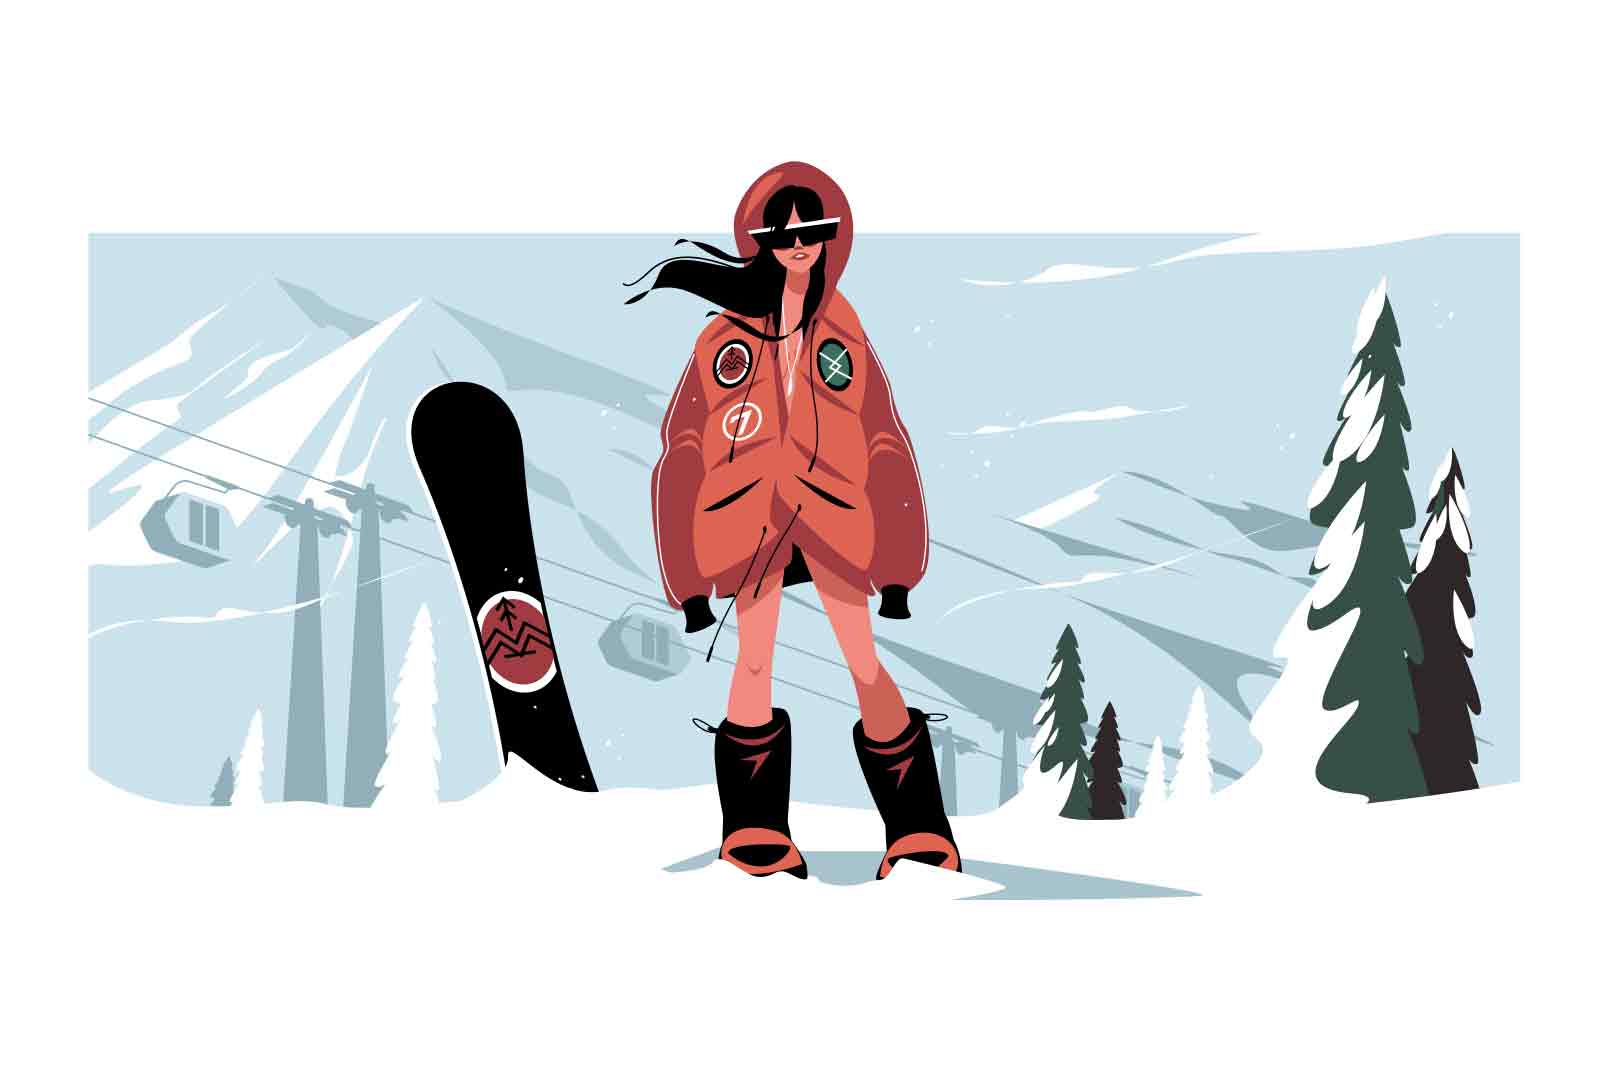 Girl with snowboard stand on snowy mountain vector illustration. Snowboarder on hill before sliding down flat style. Sport concept